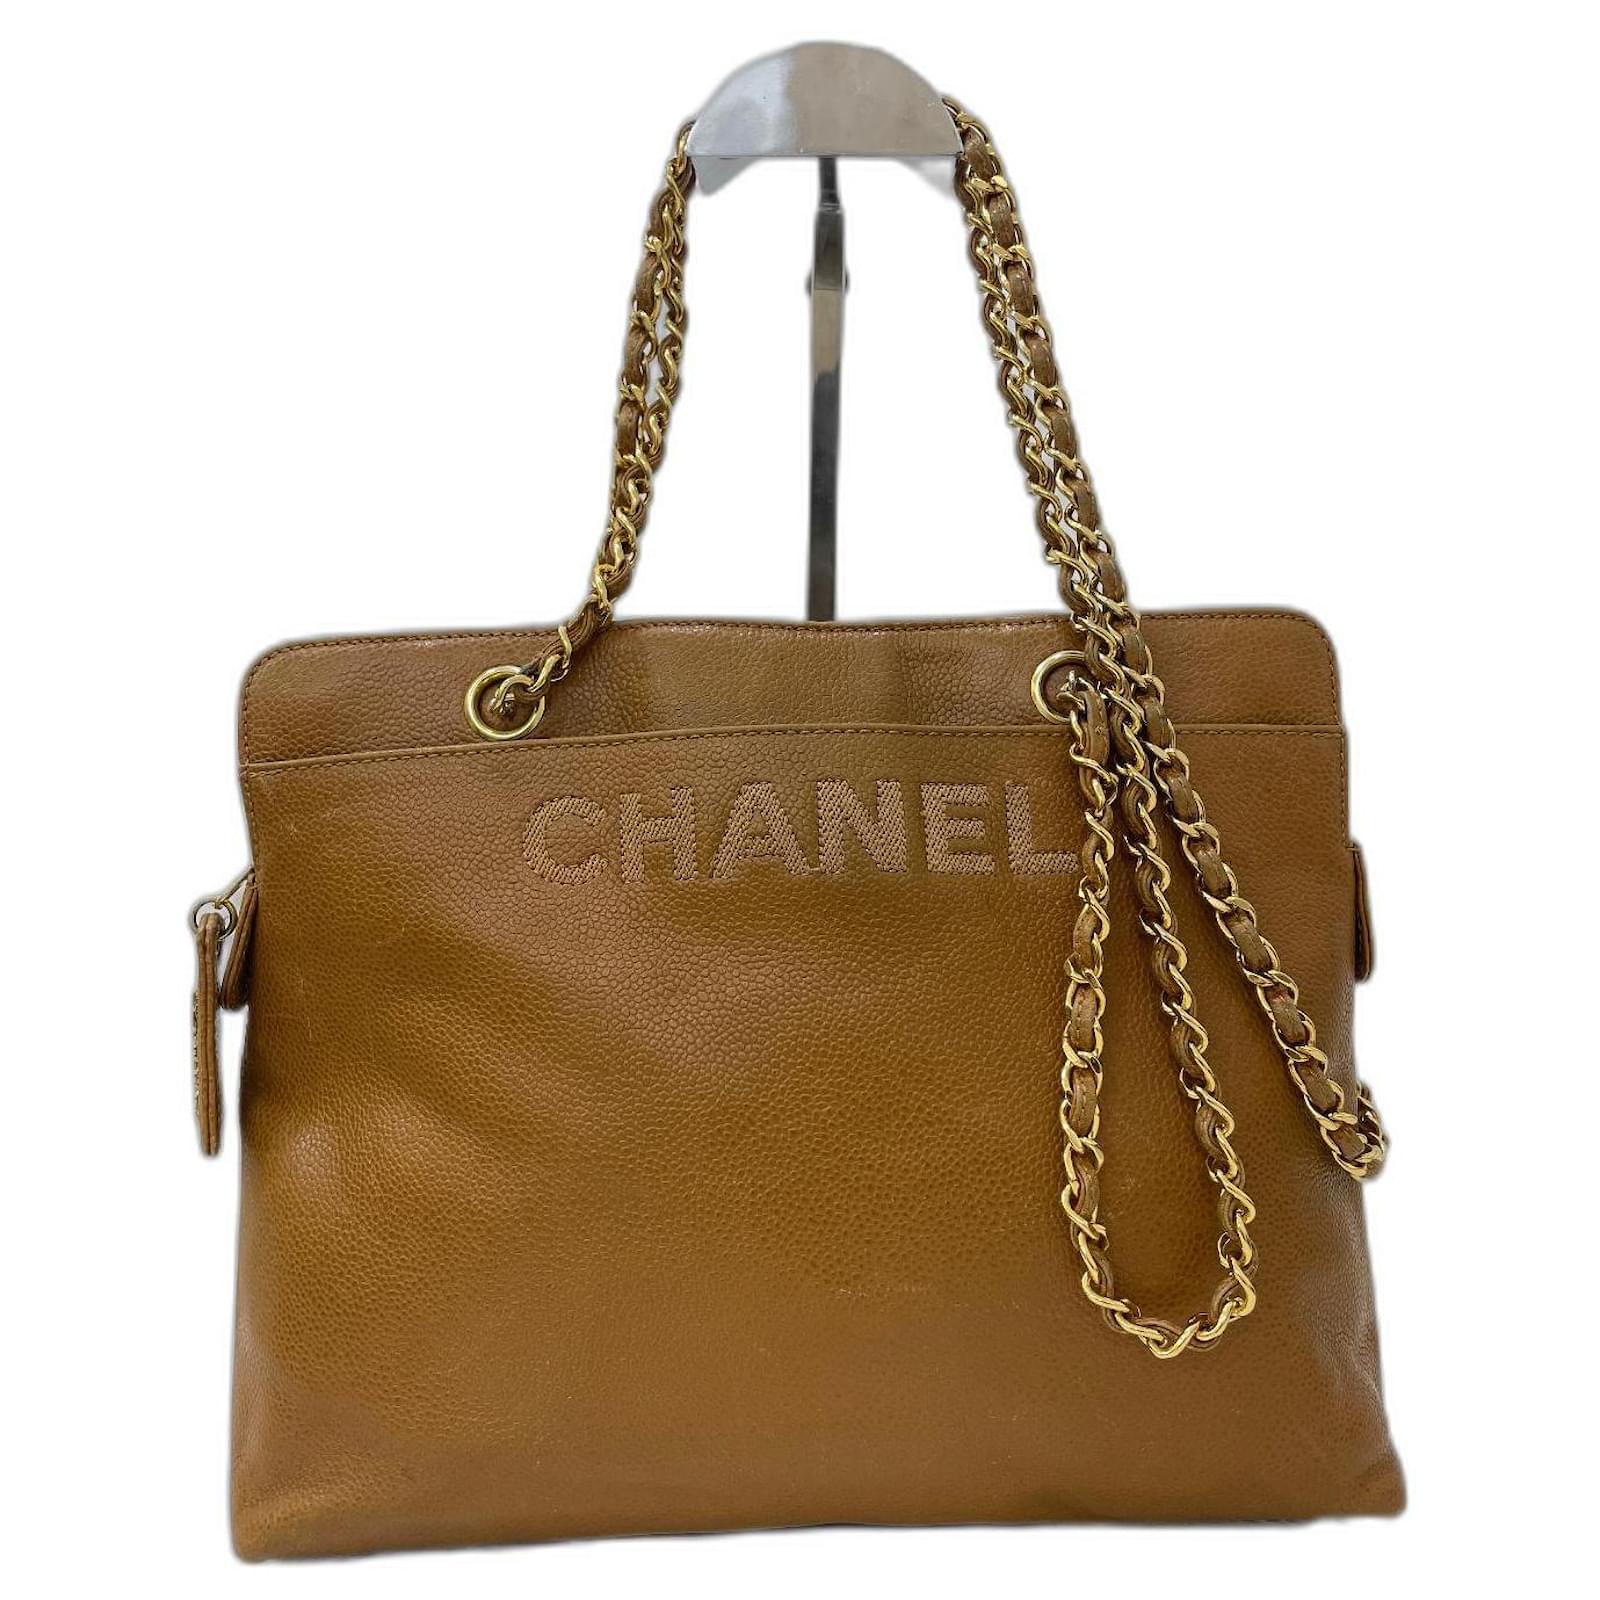 Buy Vintage CHANEL Brown Beige Caviar Leather Chain Tote Bag